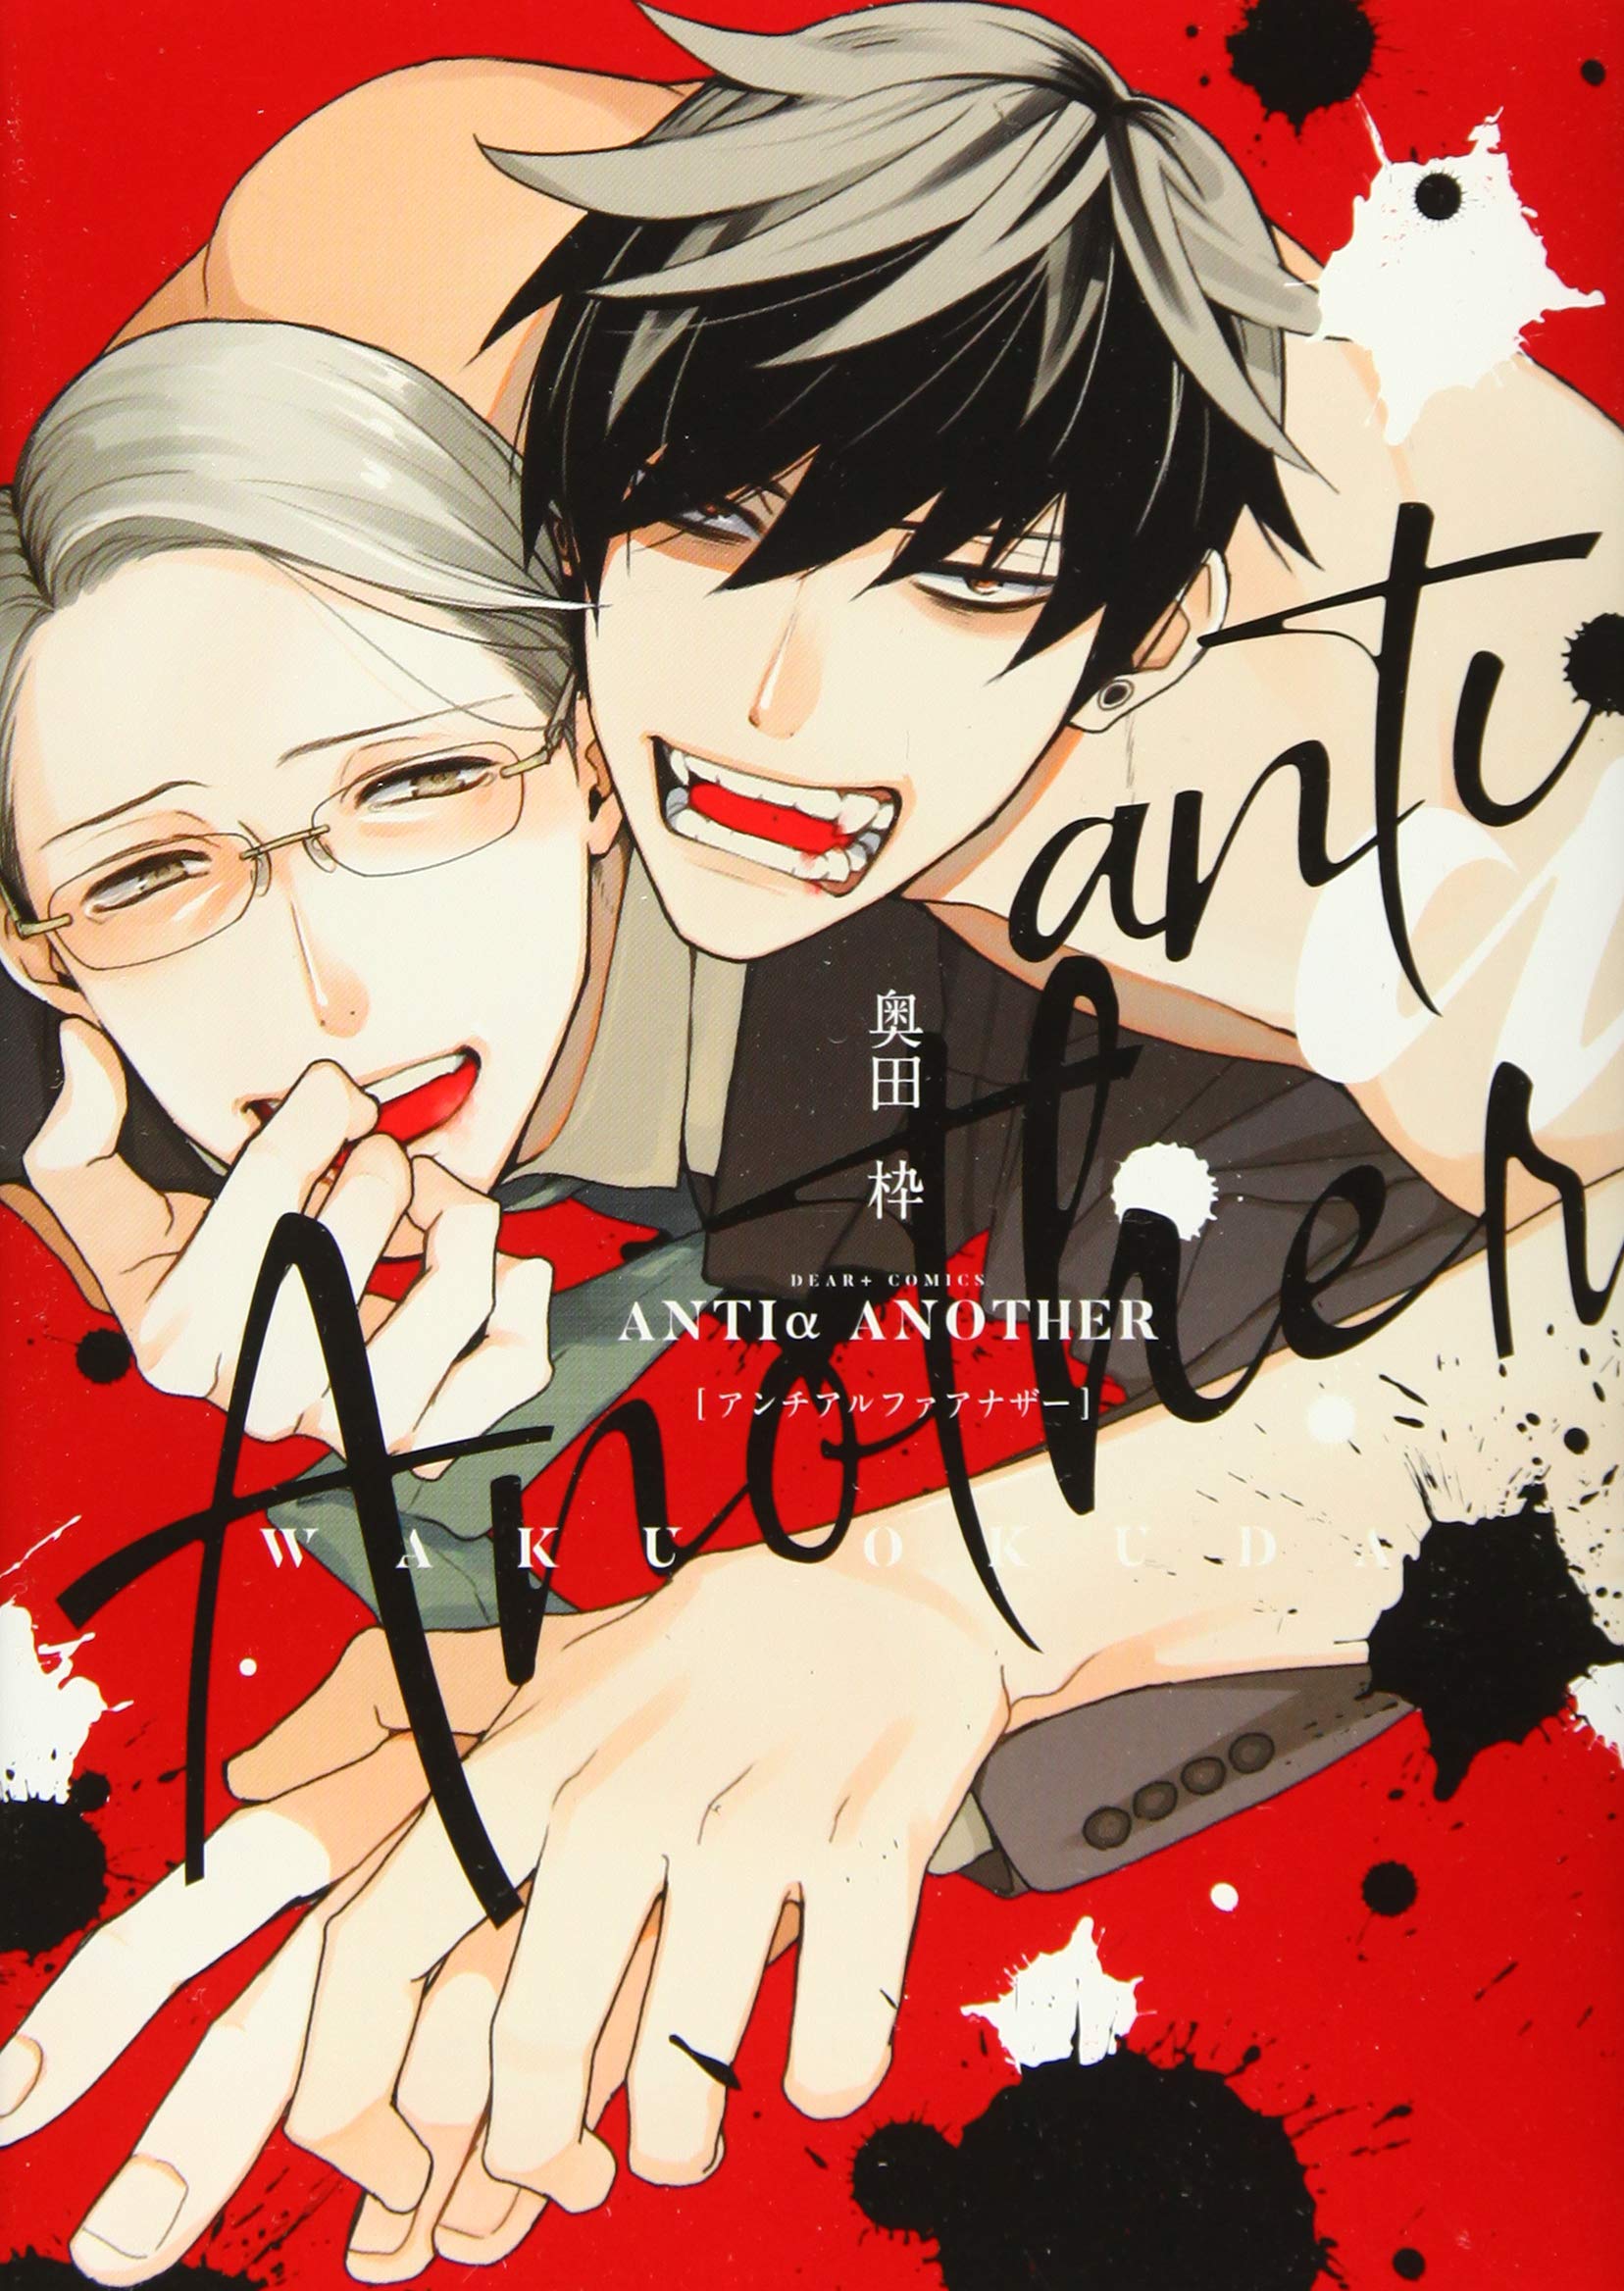 Anti Alpha Another漫画